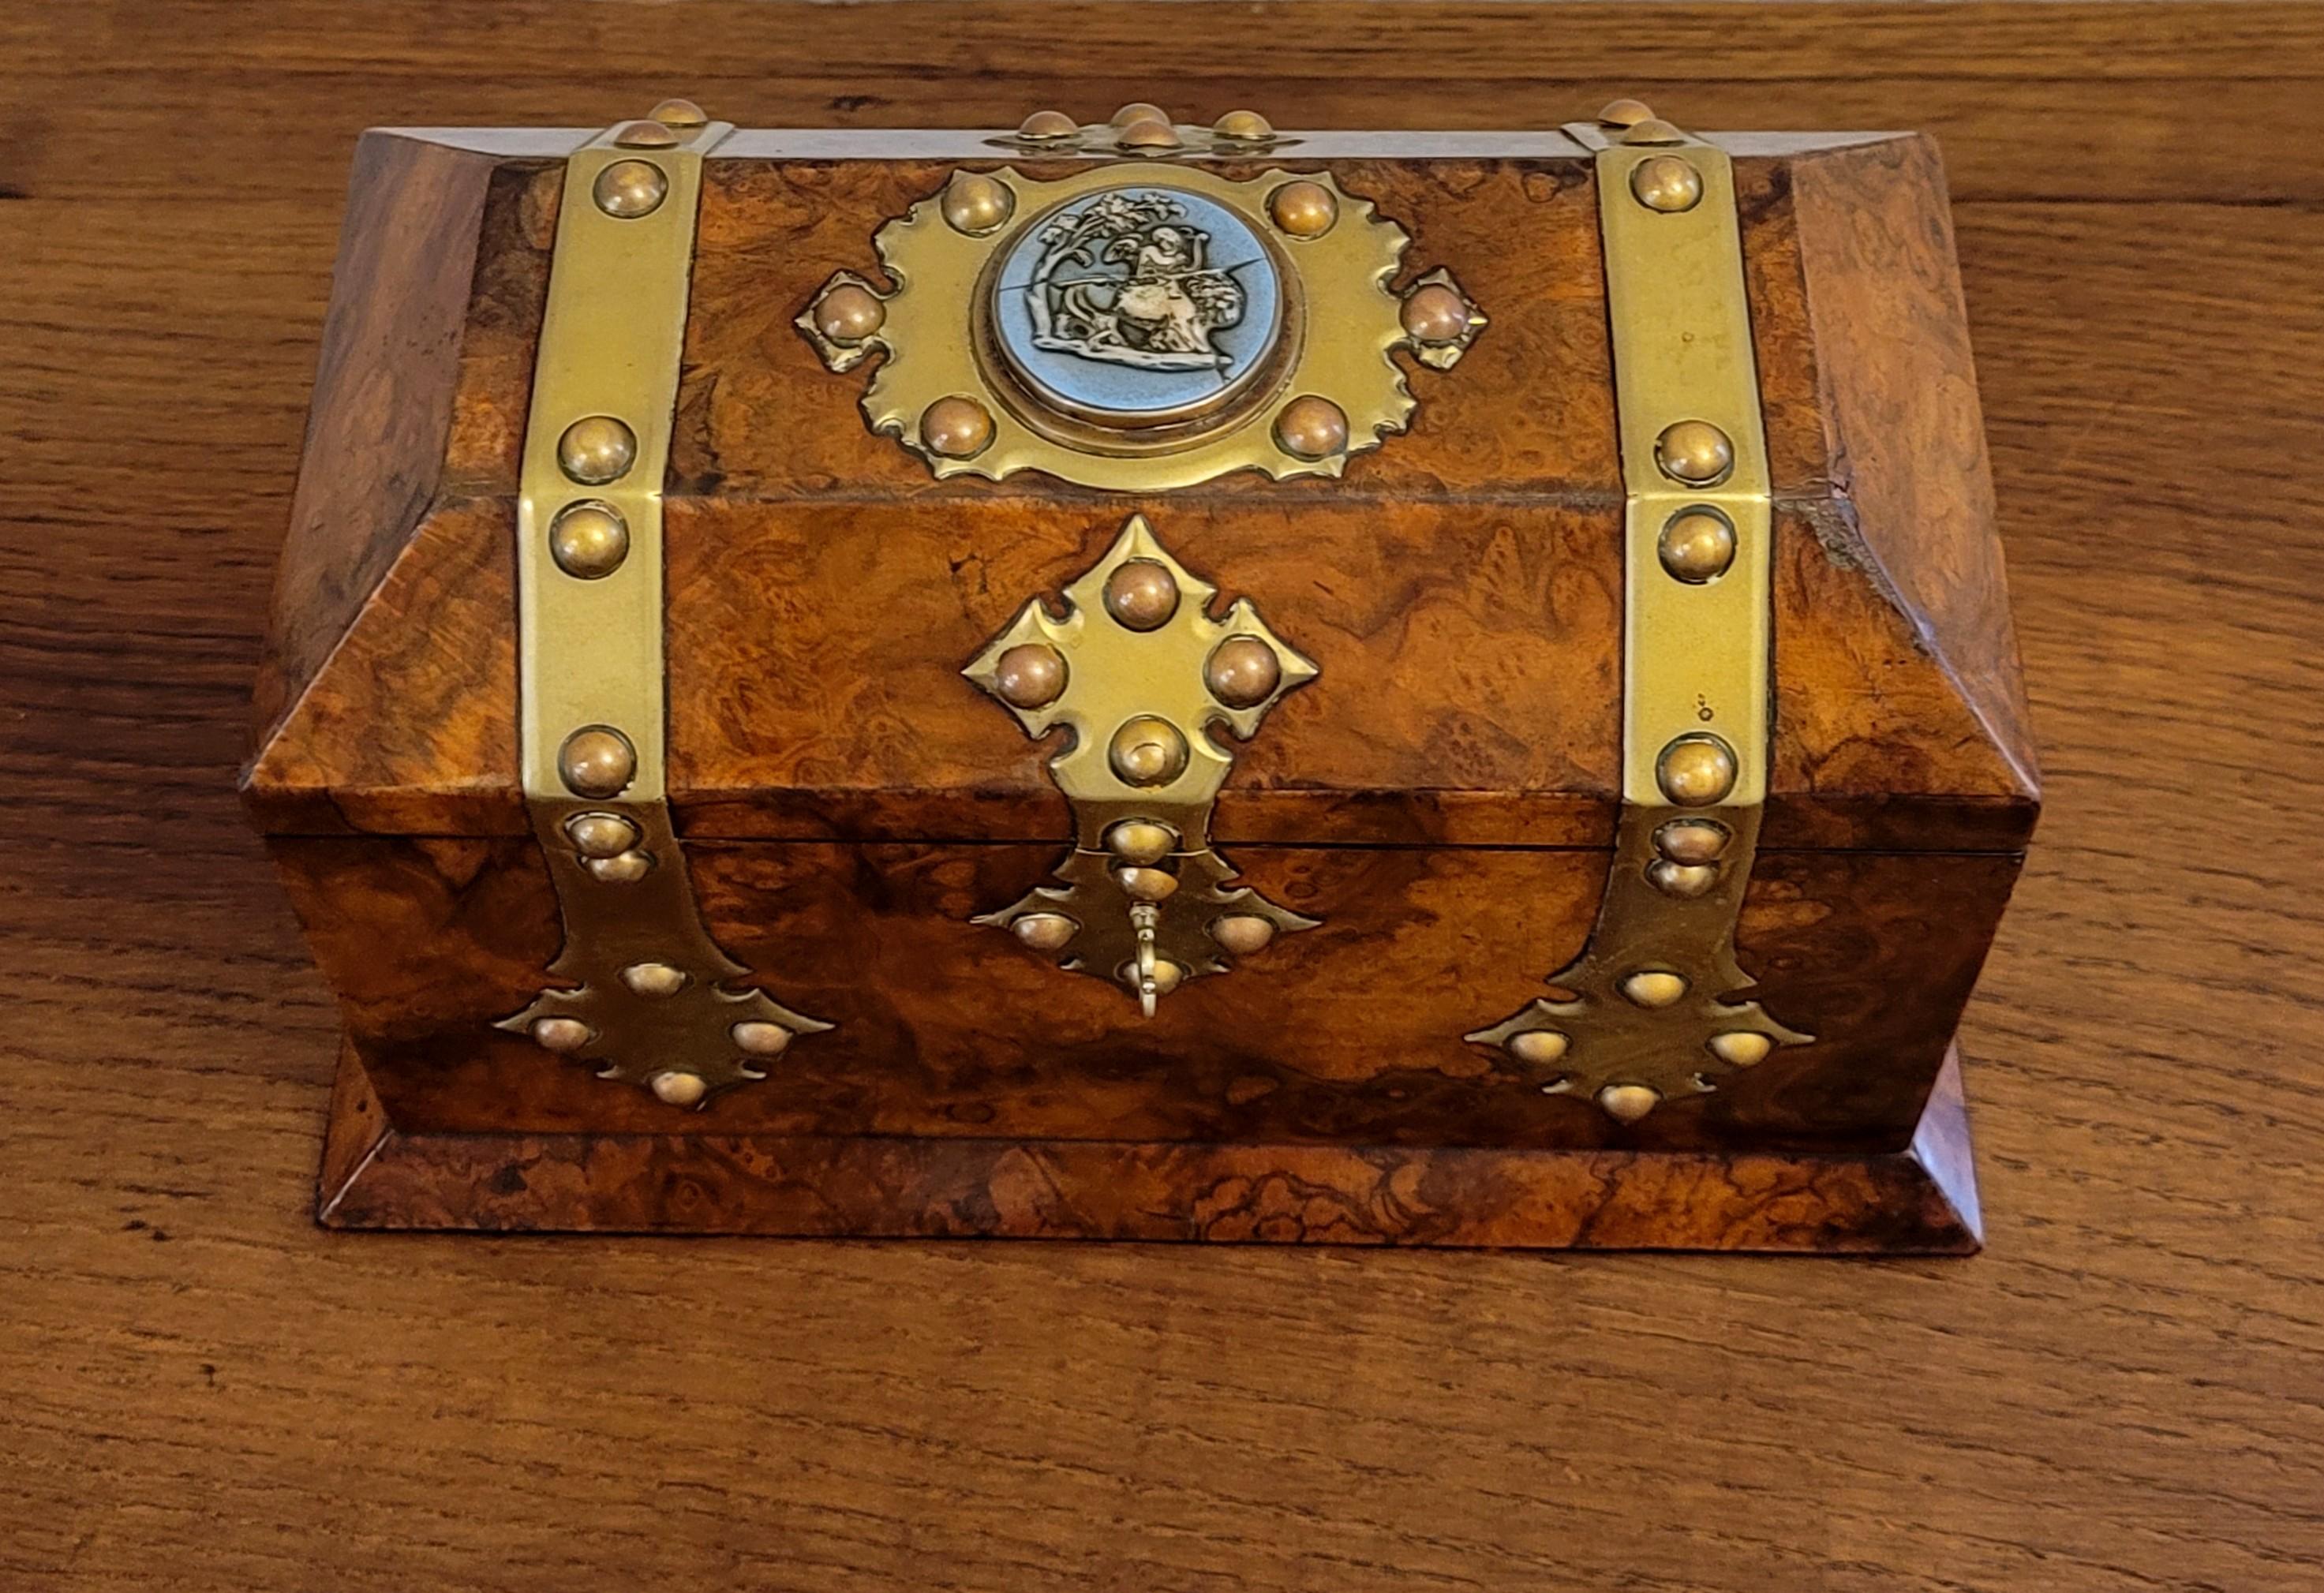 19th Century English Wedgewood Retailed Burl Walnut Tea Caddy  In Good Condition For Sale In Forney, TX